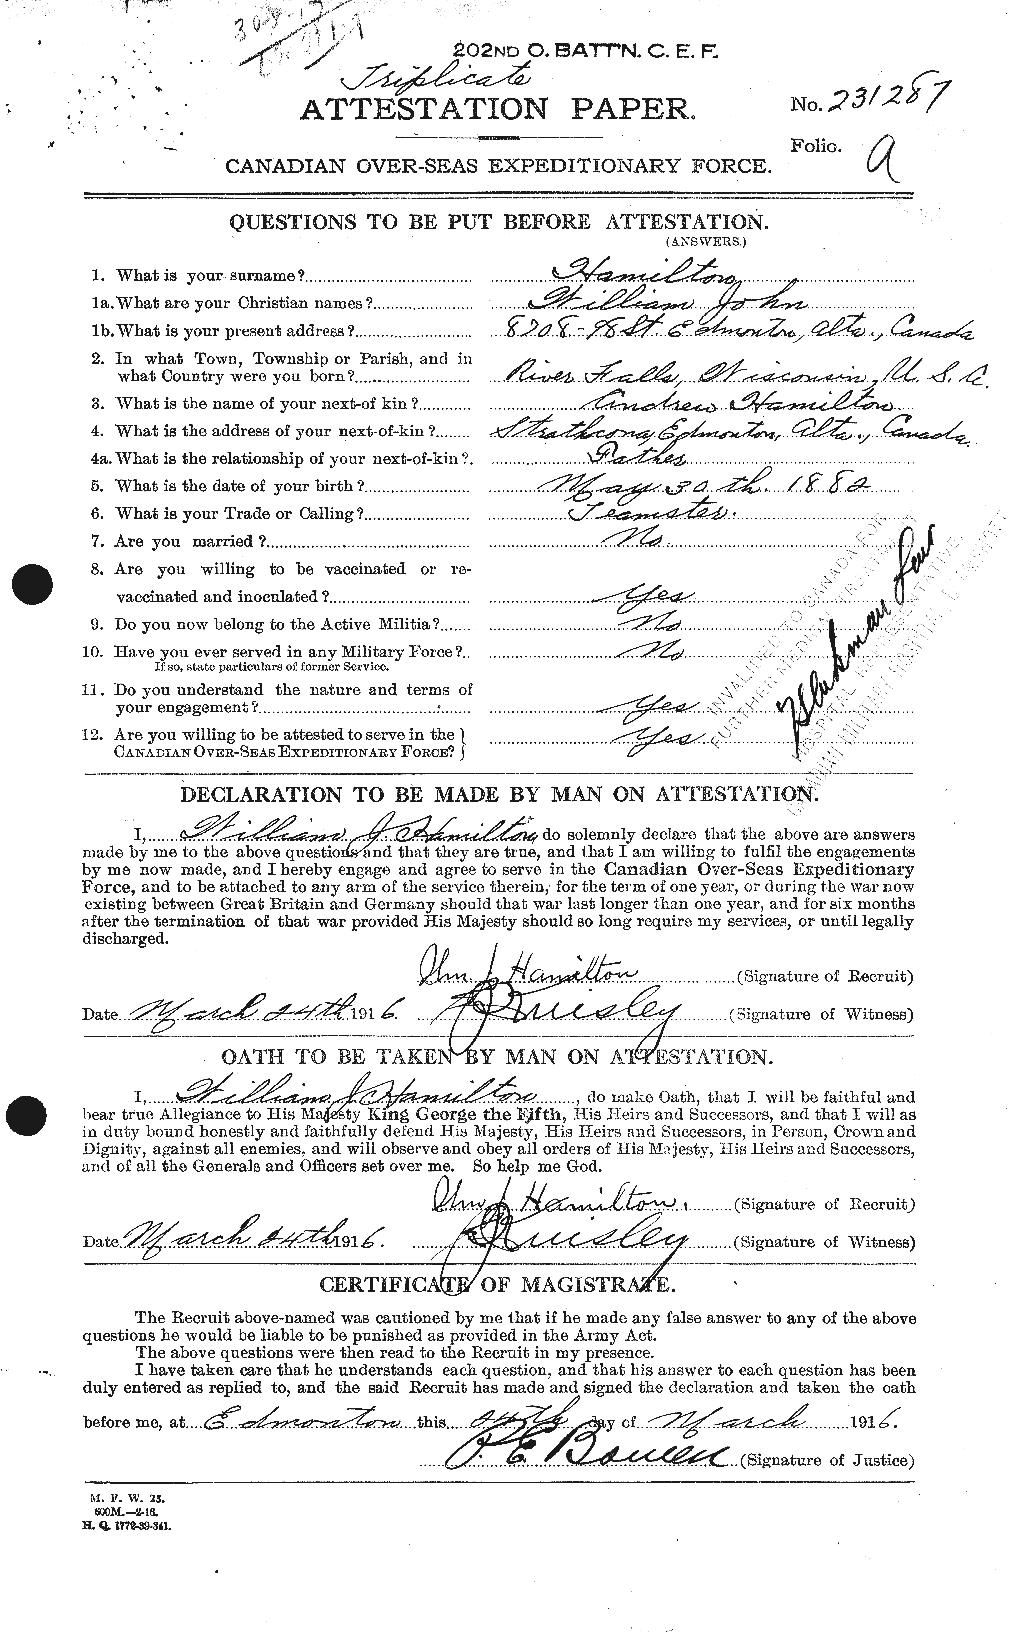 Personnel Records of the First World War - CEF 374911a